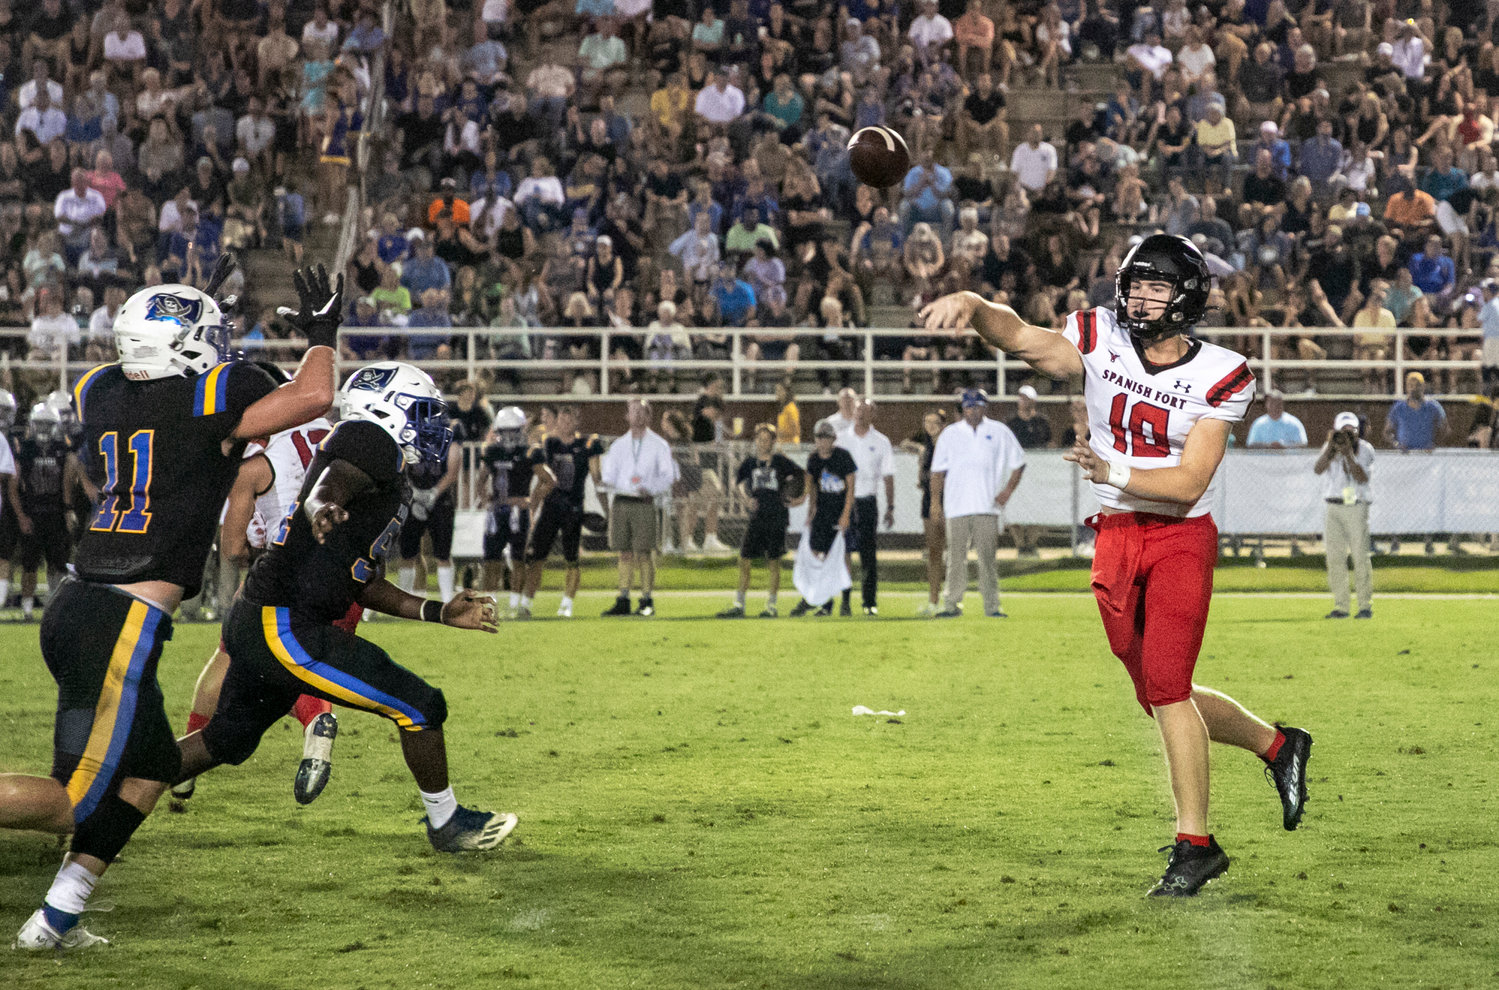 Spanish Fort quarterback Brayden Walker fires a throw from the pocket in the Toros' first game of the season Friday, Aug. 20, at Fairhope Municipal Stadium.